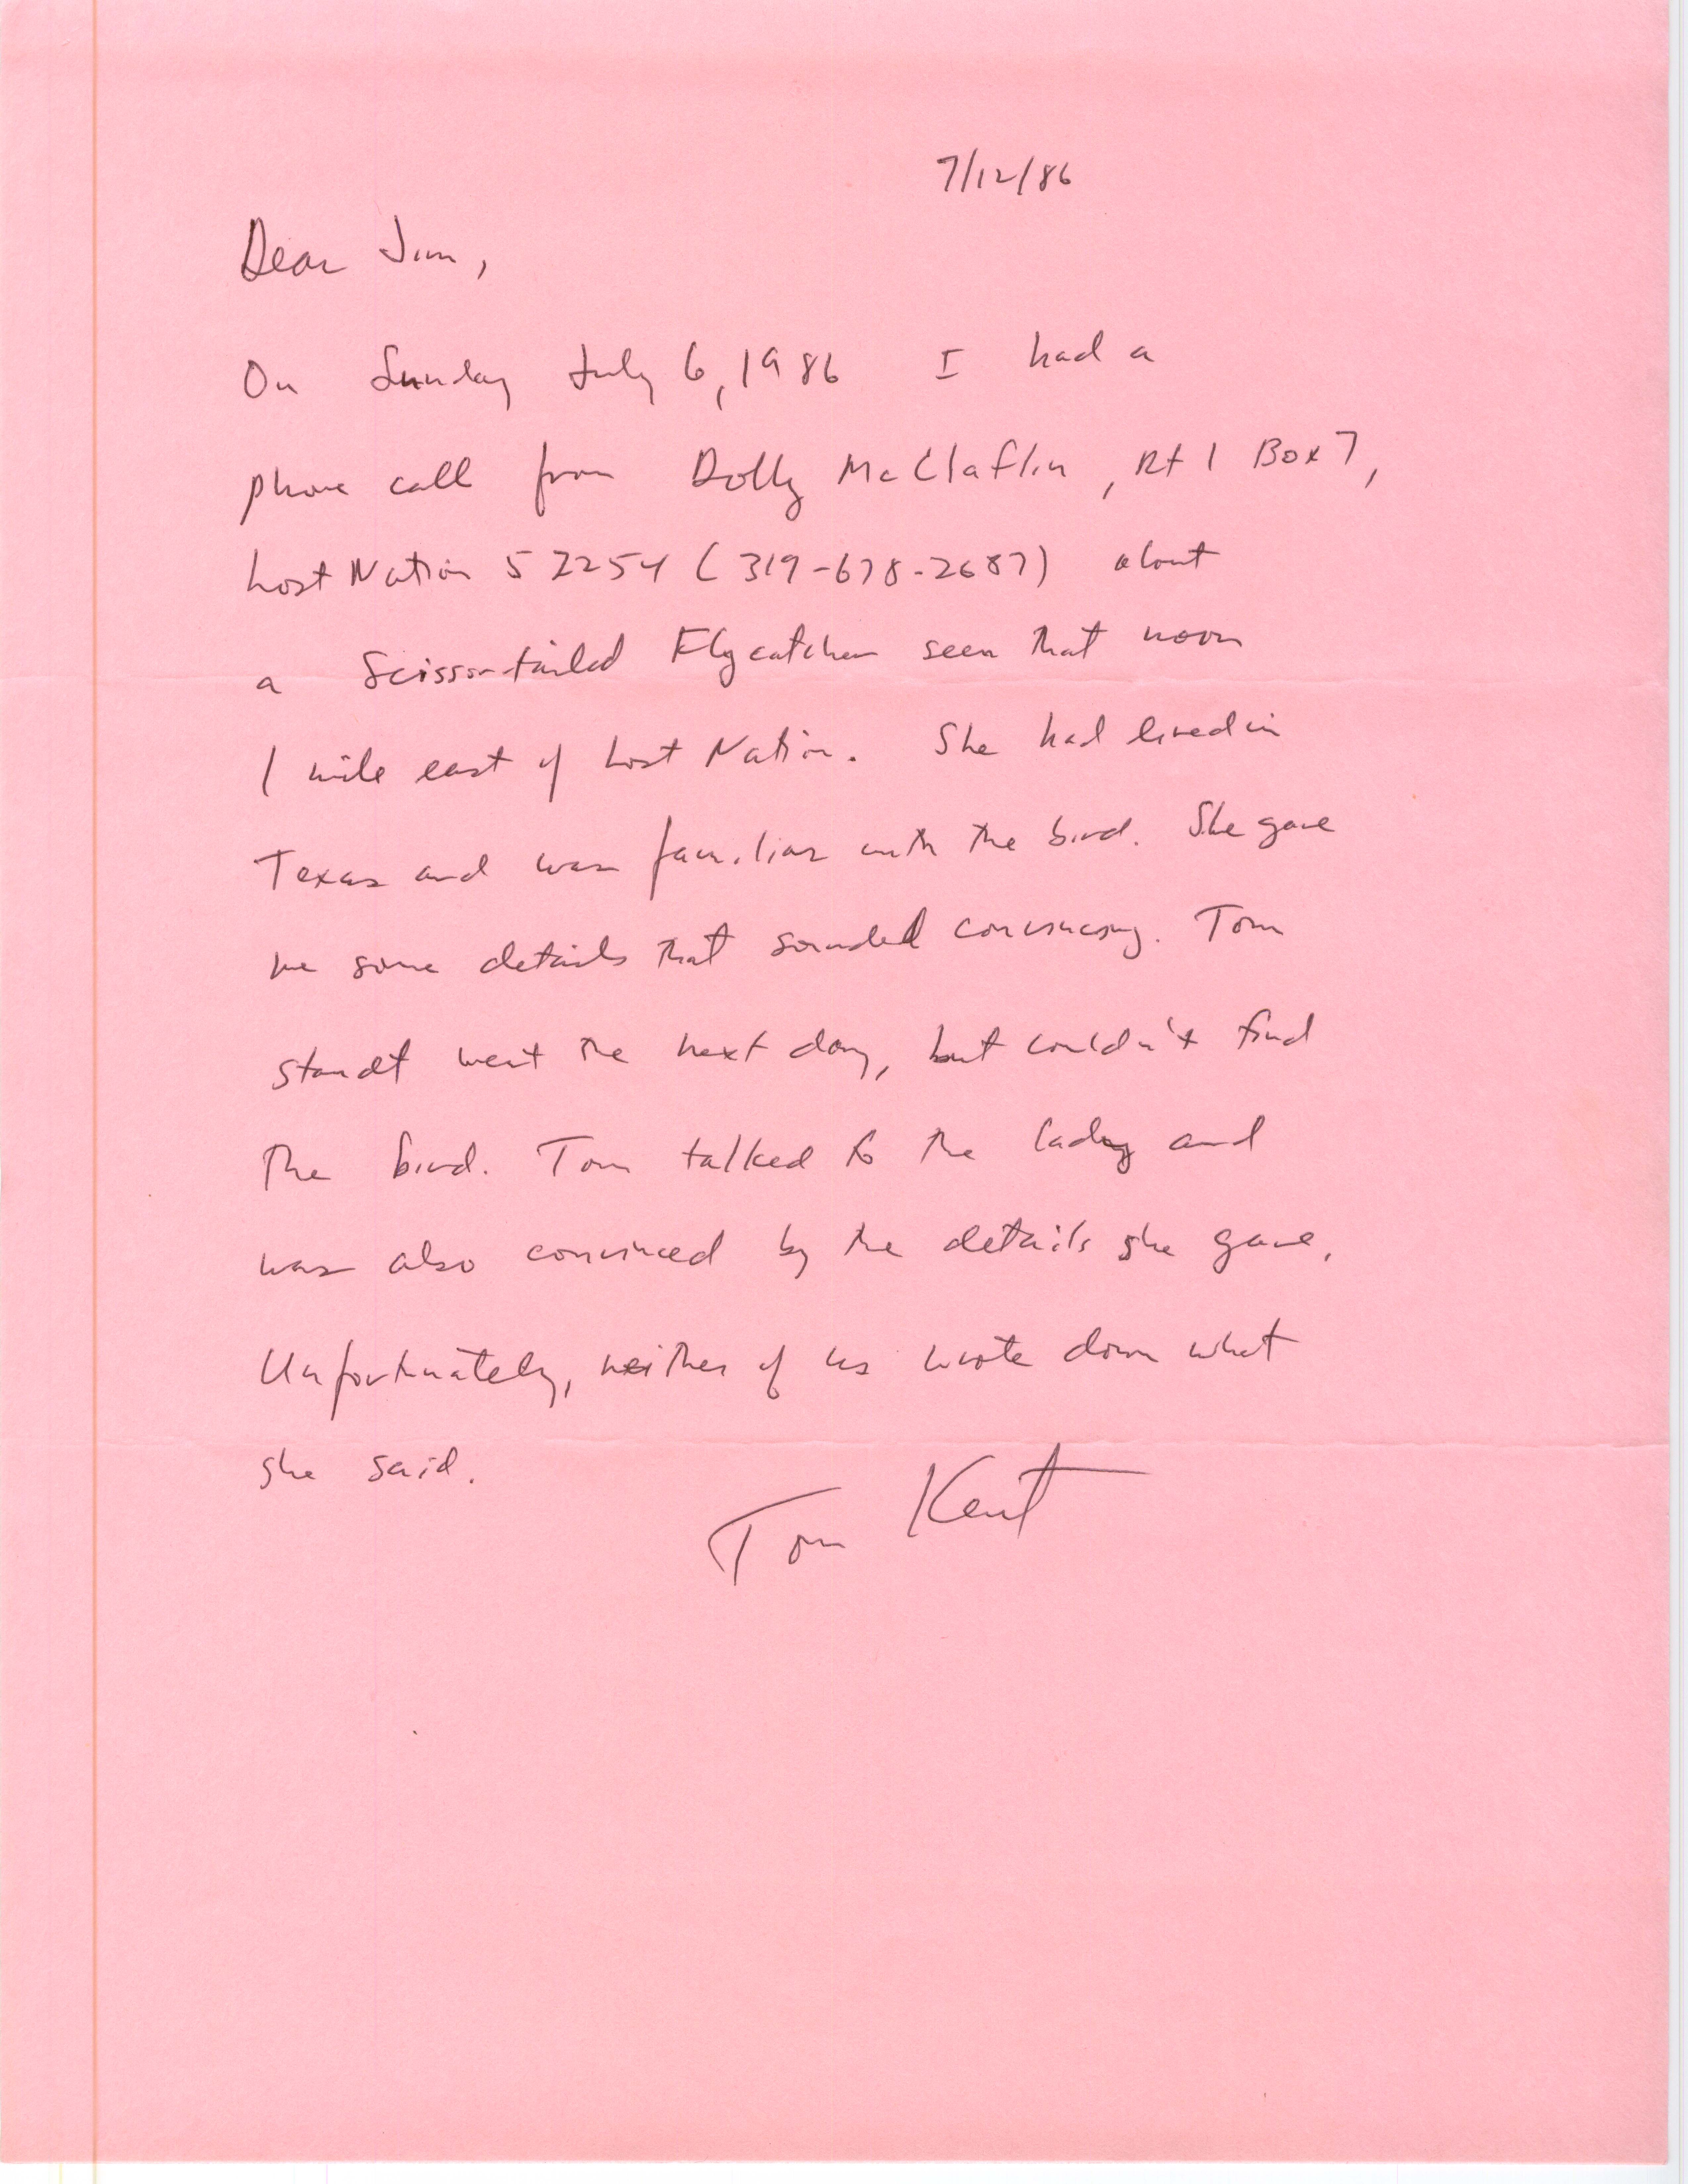 Thomas H. Kent letter to James J. Dinsmore regarding the sighting of a Scissor-tailed Flycatcher, July 12, 1986